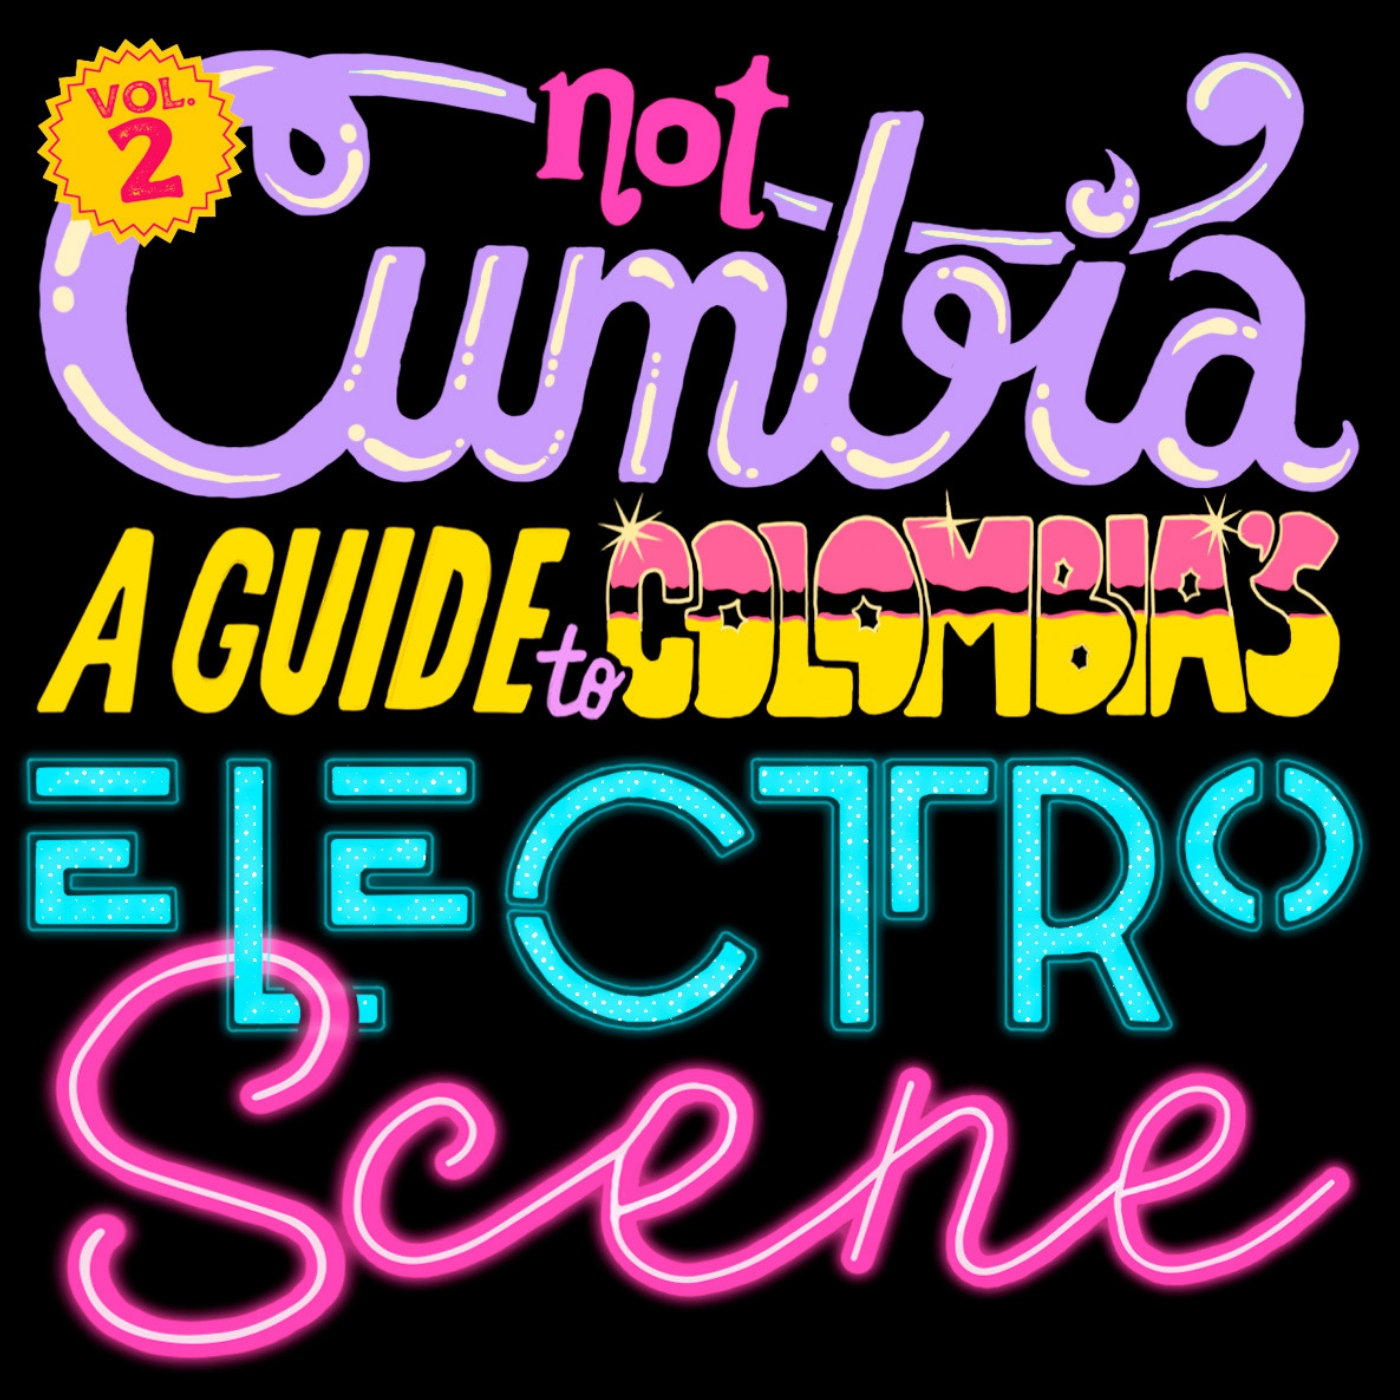 Not Cumbia: A Guide To Colombia's Electro Scene, Vol. 2